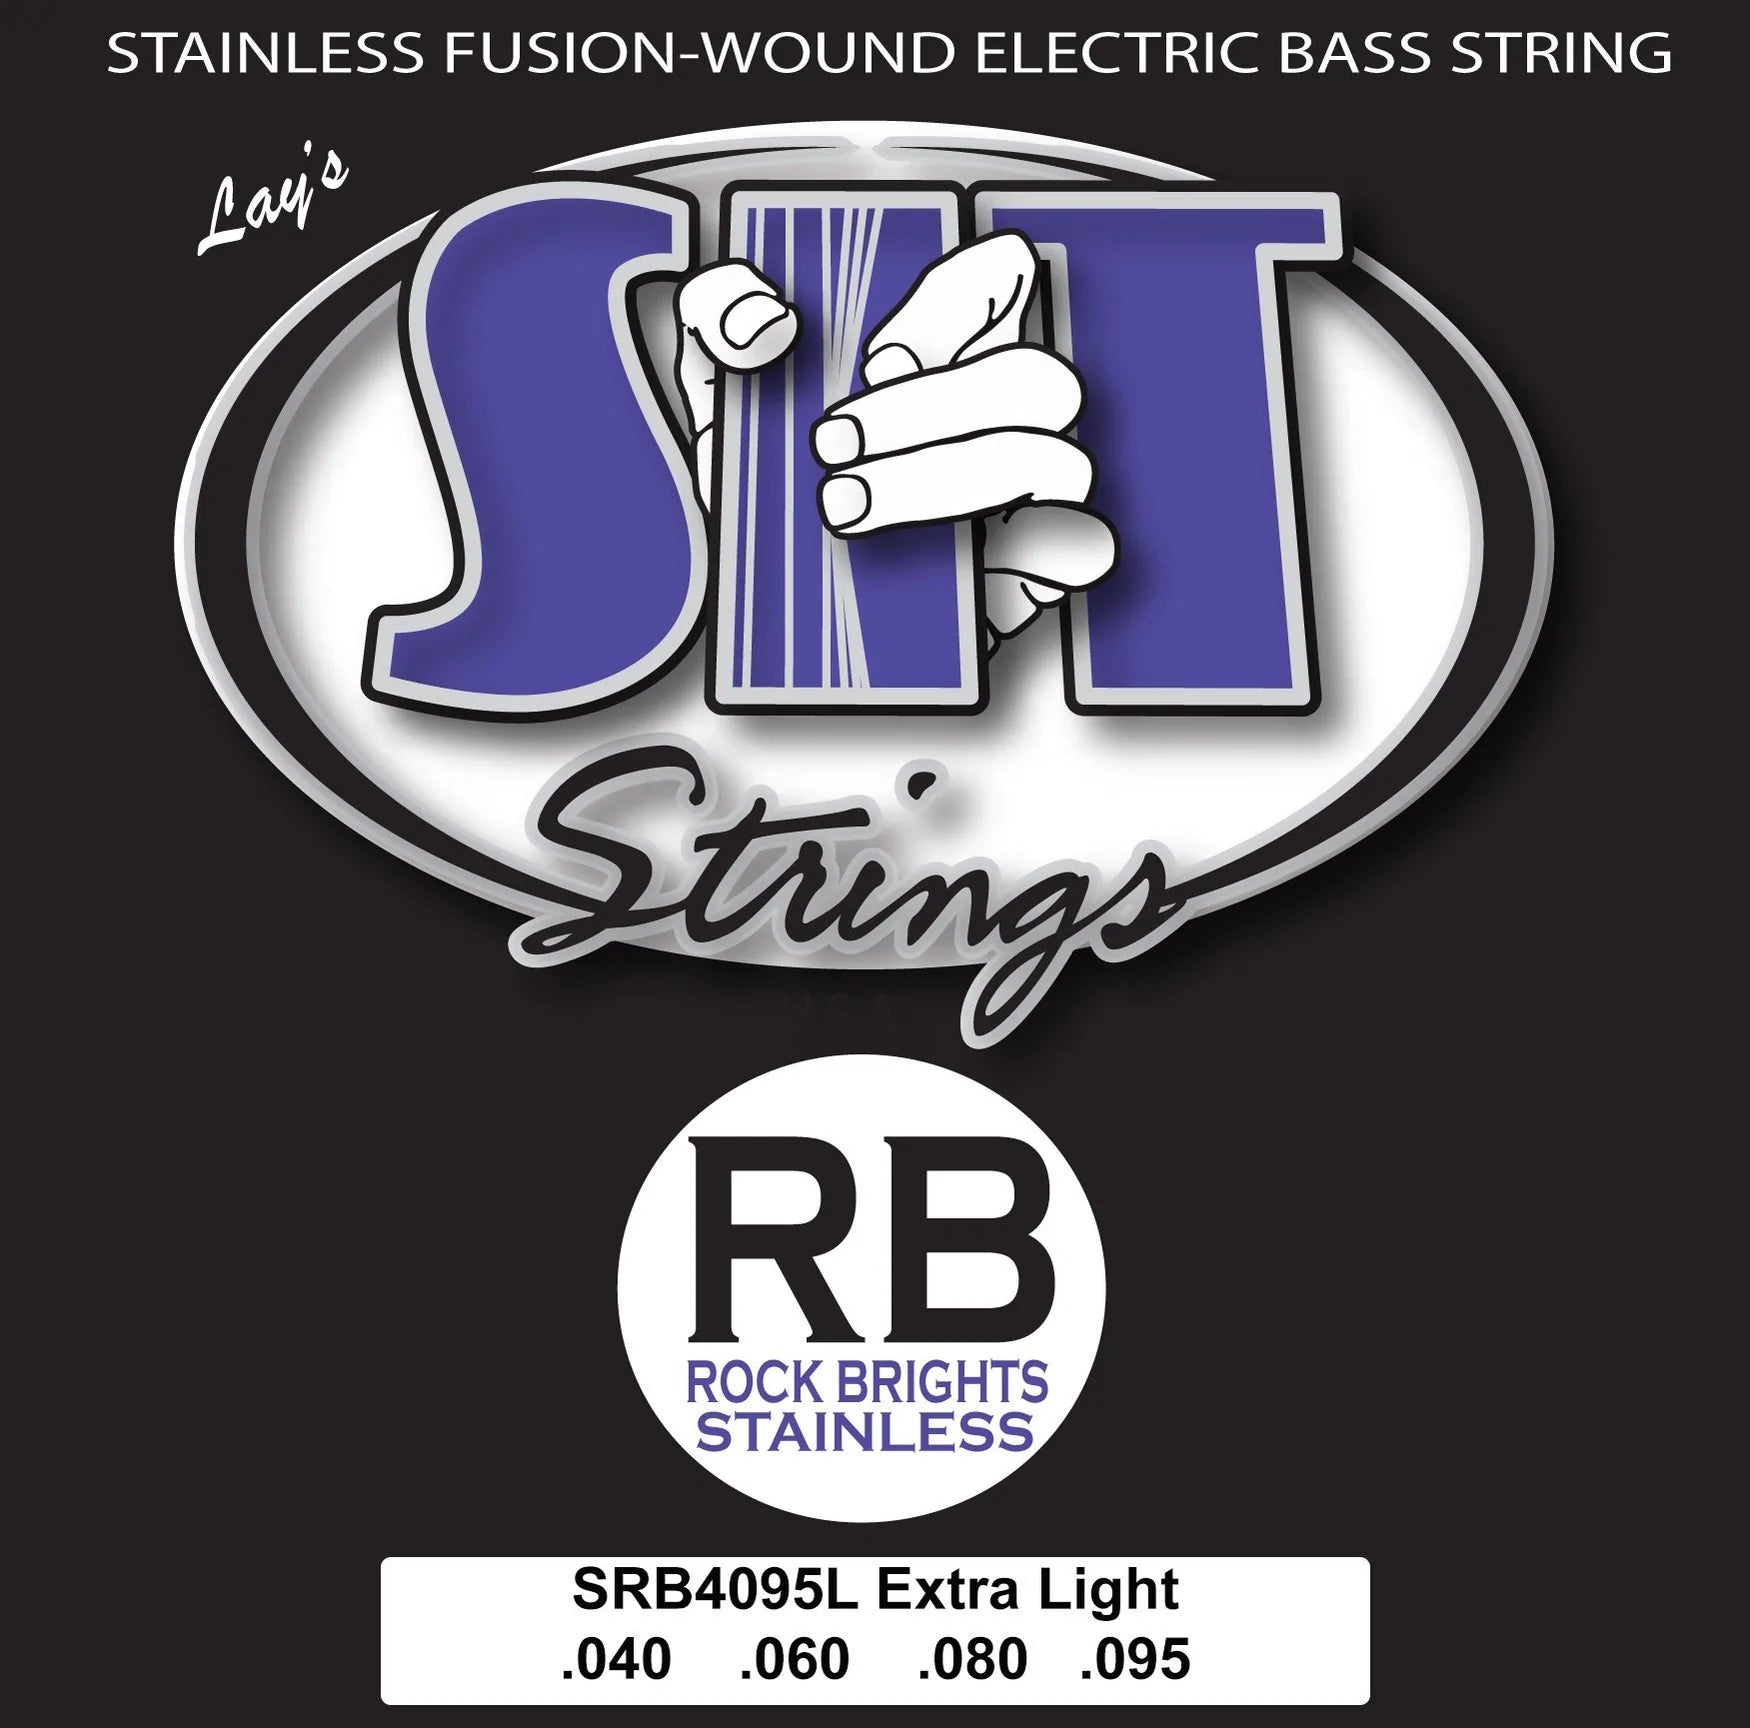 SIT ROCK BRIGHT STAINLESS STEEL BASS - HIENDGUITAR SRB4095L EXTRA LIGHT SRB4095L EXTRA LIGHT SIT Bass Strings